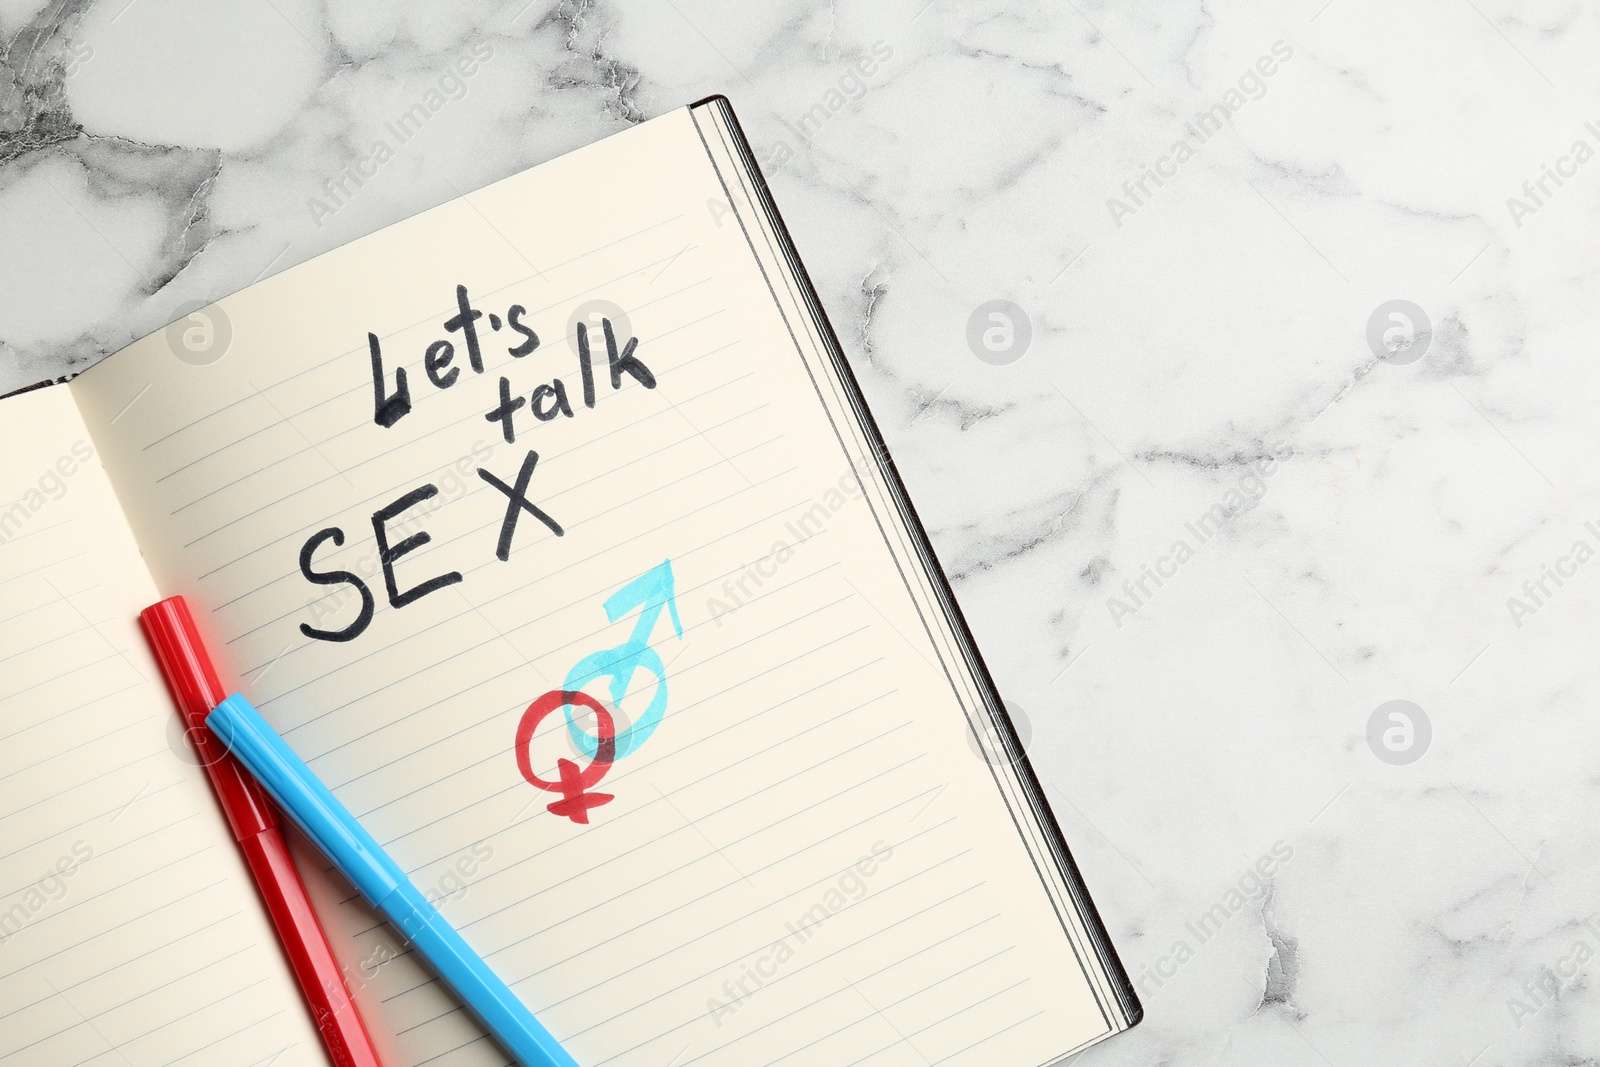 Photo of Notebook with phrase "LET'S TALK SEX" and gender symbols on marble background, top view